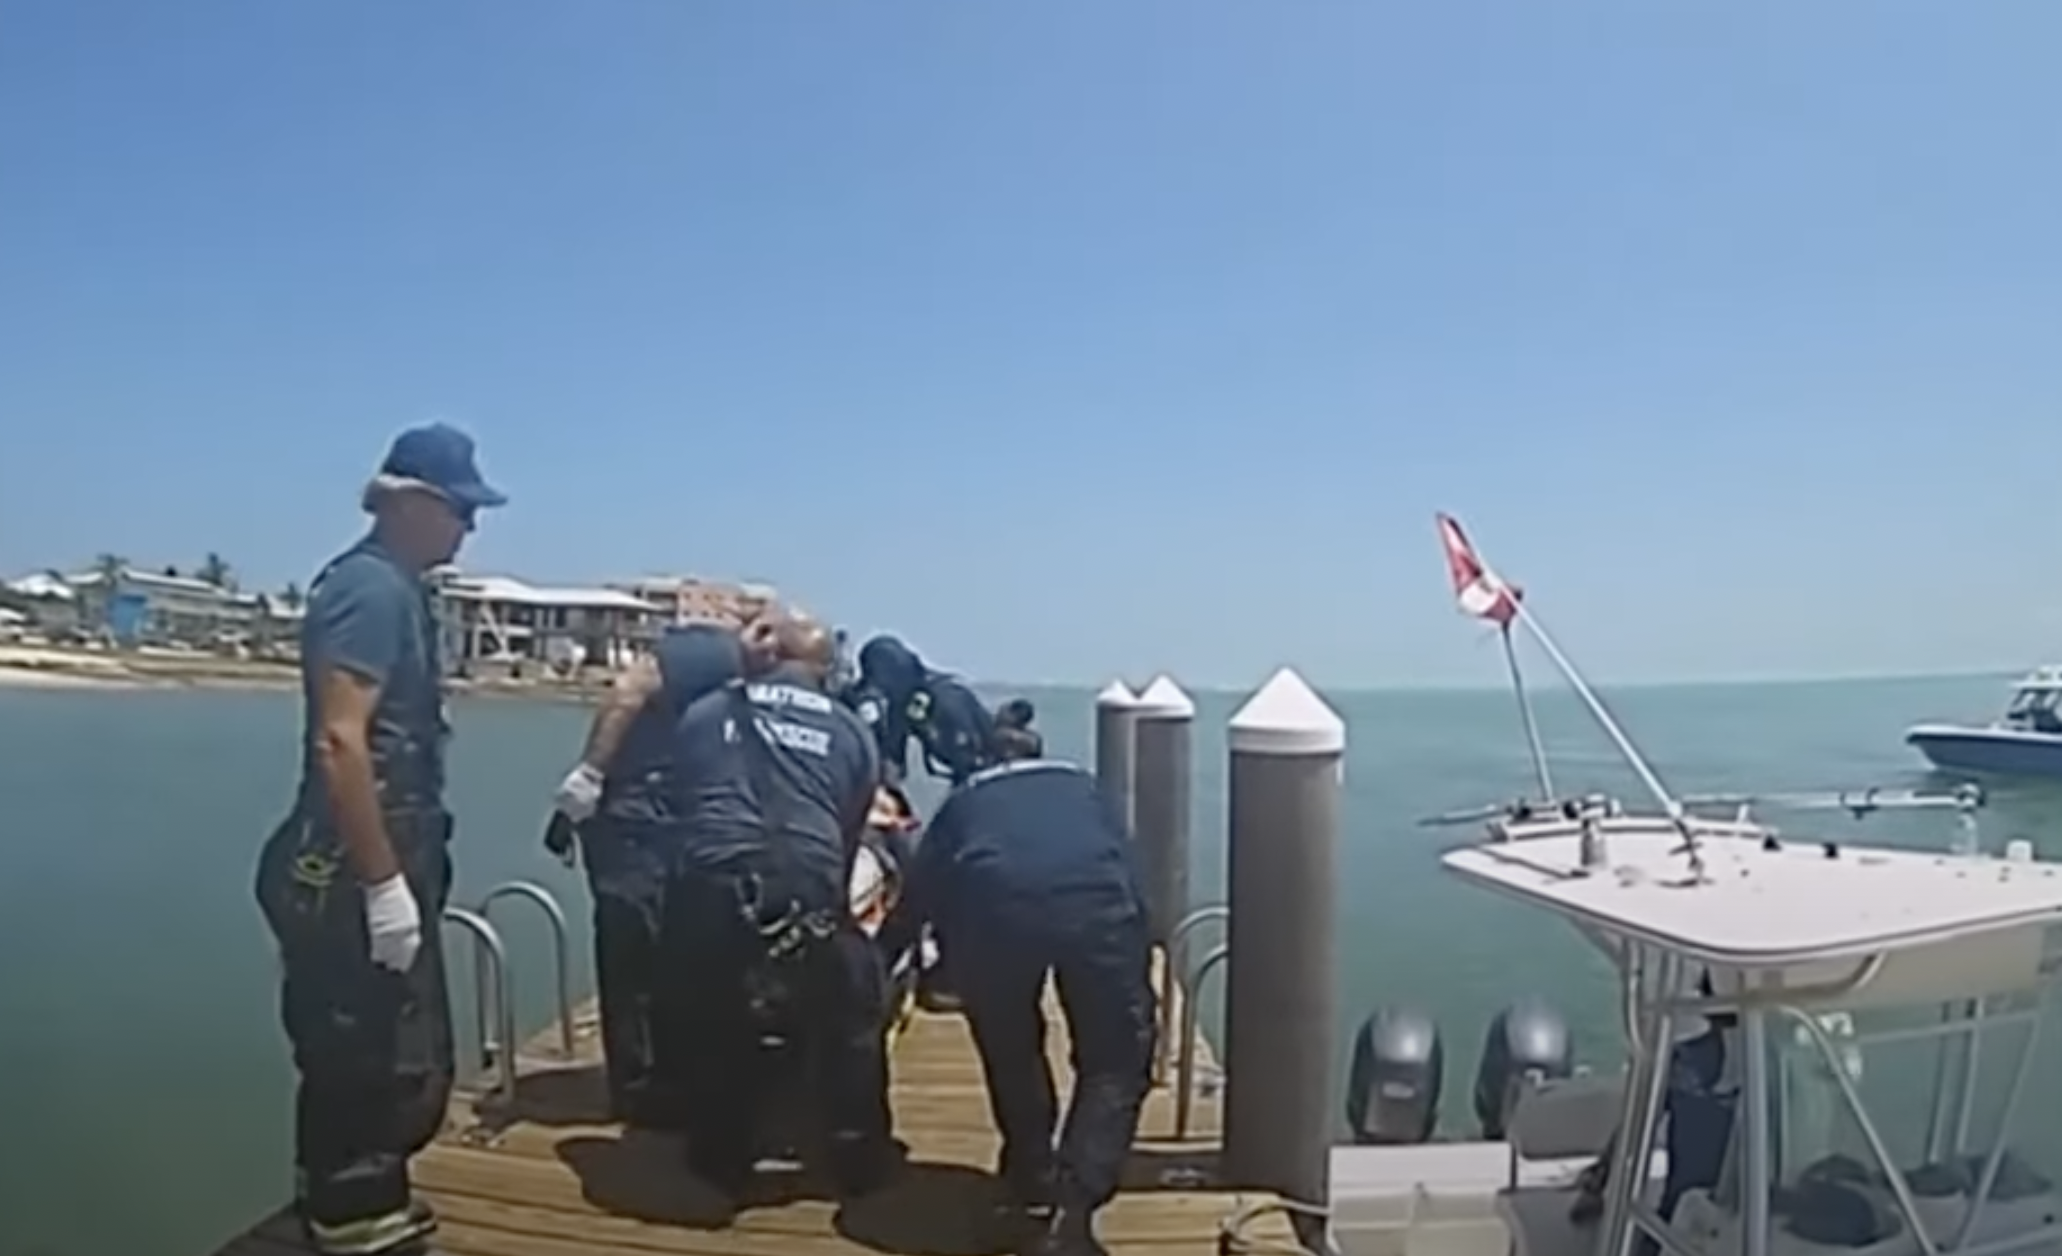 Lifeguards are on a dock in Florida. | Source: https://www.youtube.com/watch?v=S-Sosp21blo